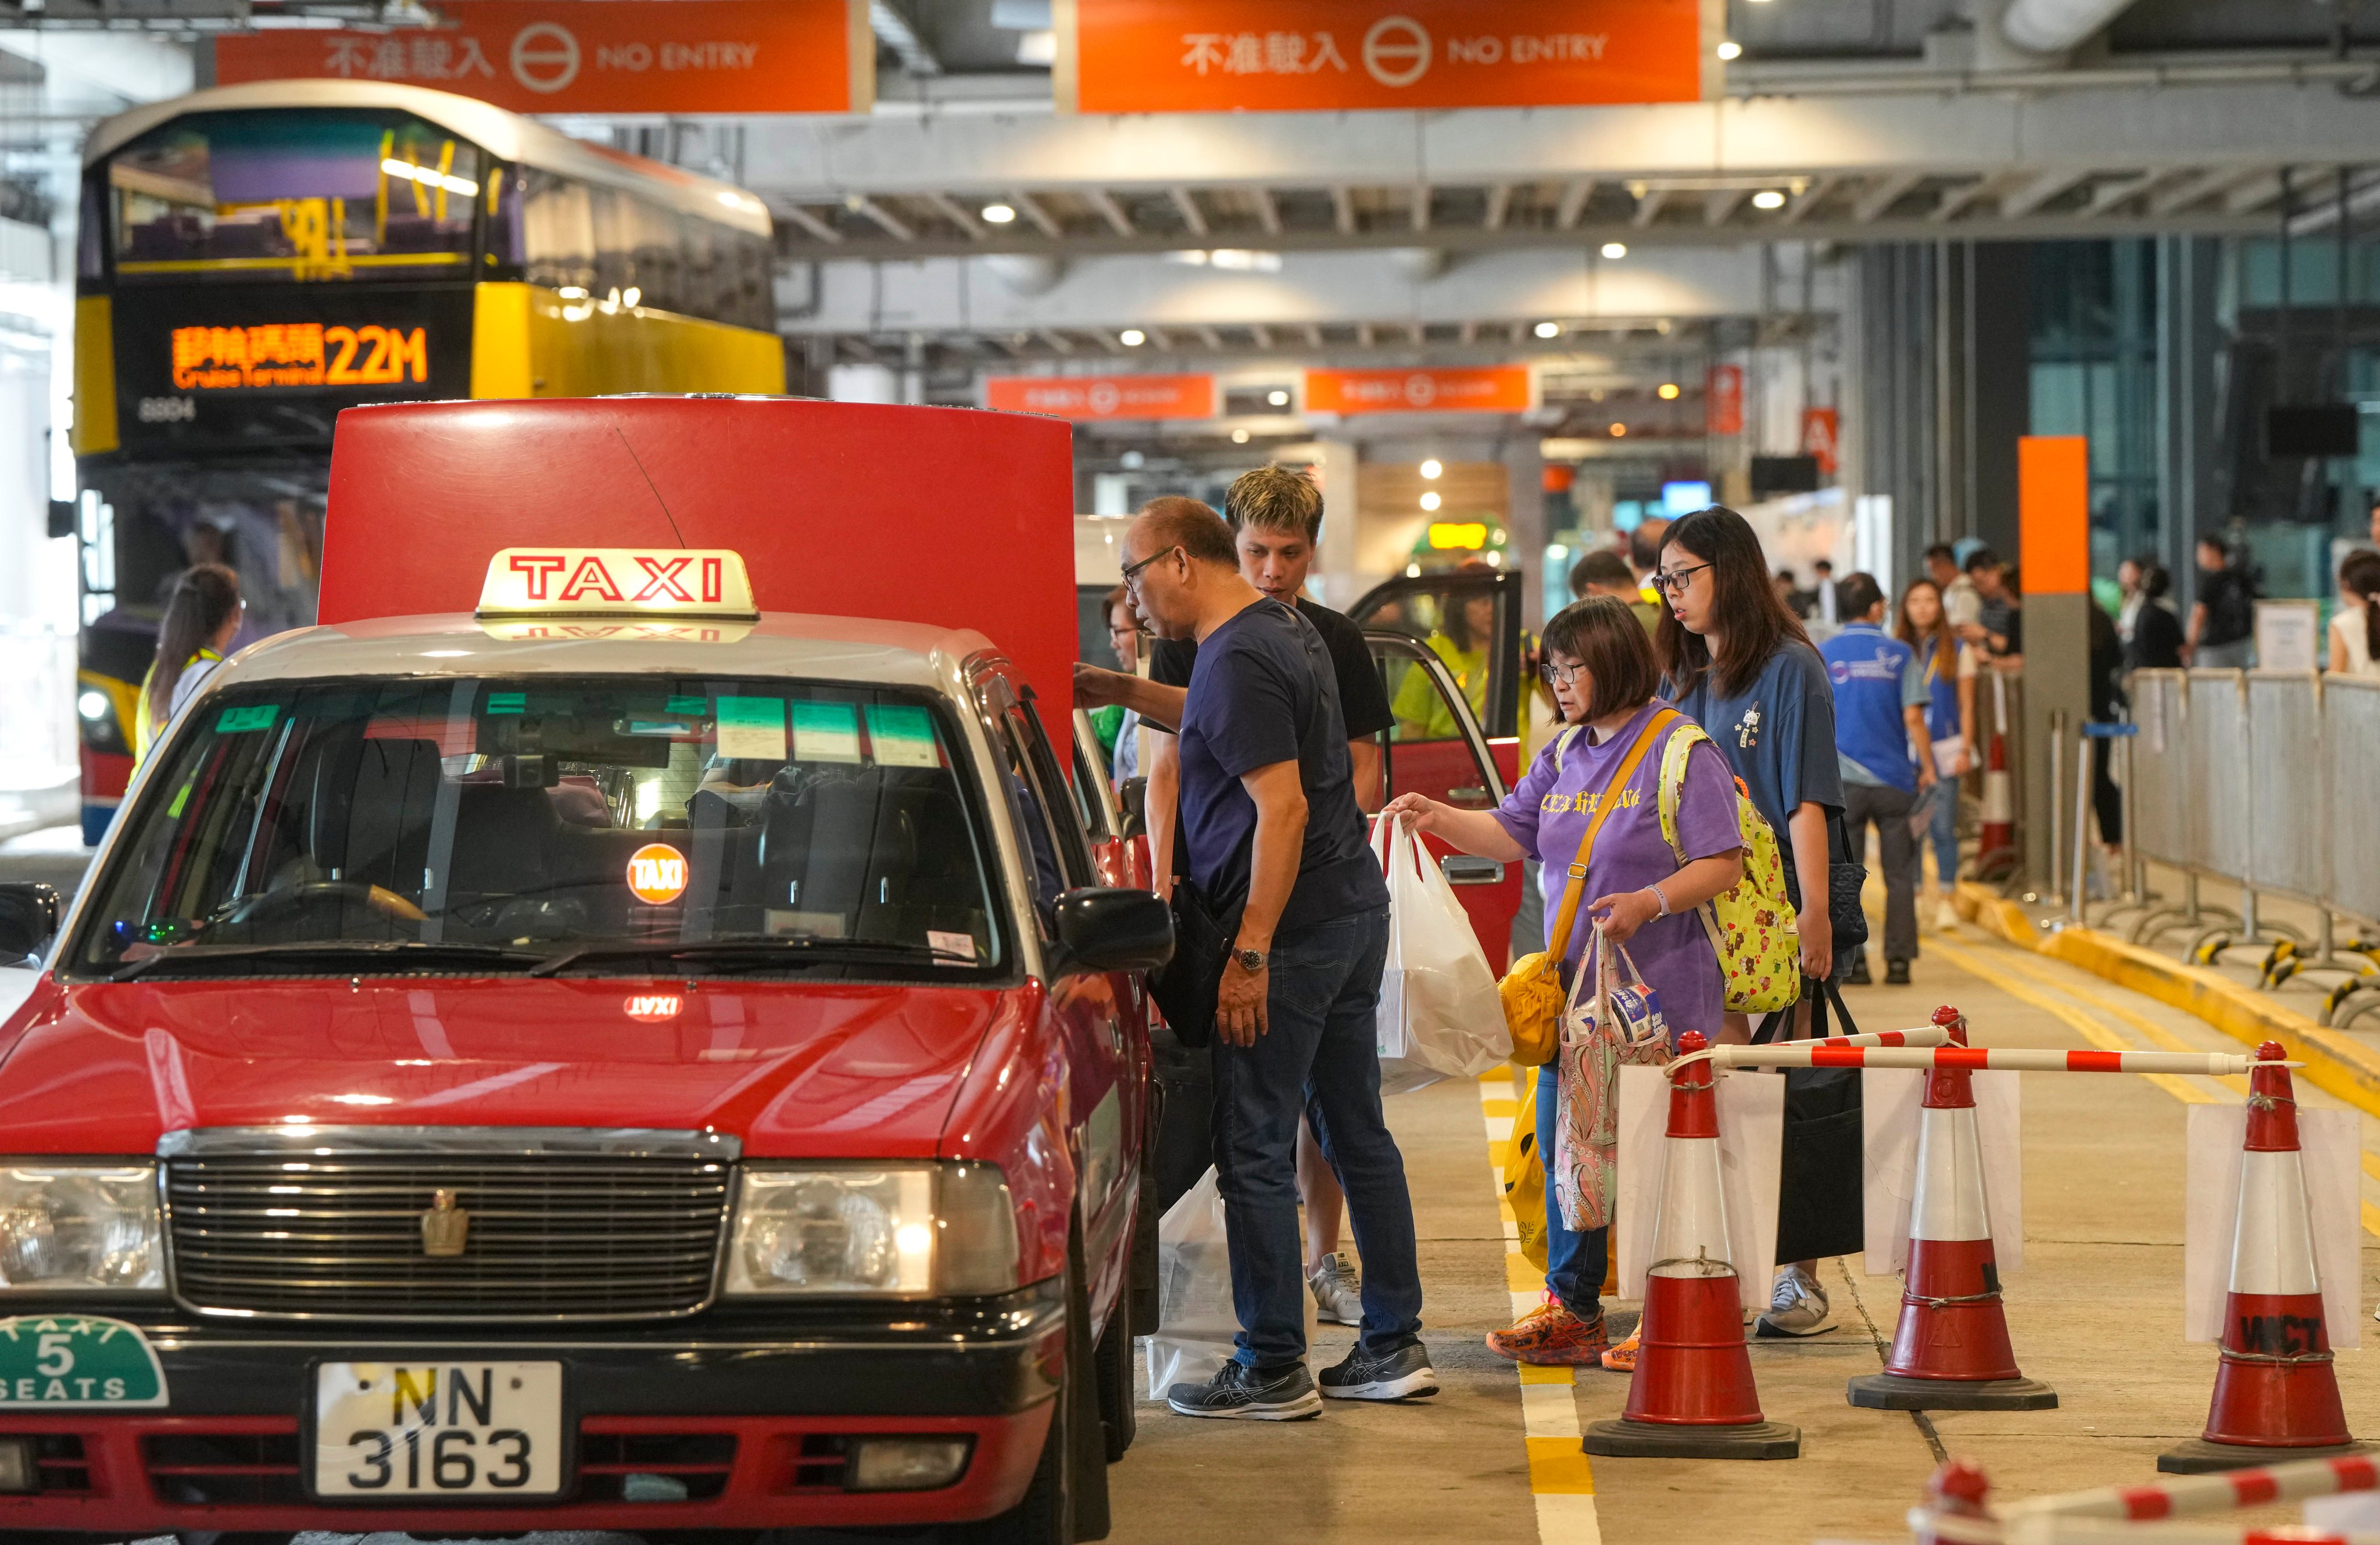 Passengers load their bags into a taxi at the Kai Tak Cruise Terminal on August 9. The terminal operator has called for more robust transport options to accommodate cruise passengers after reports of long queues of people waiting for taxis. Photo: Sam Tsang